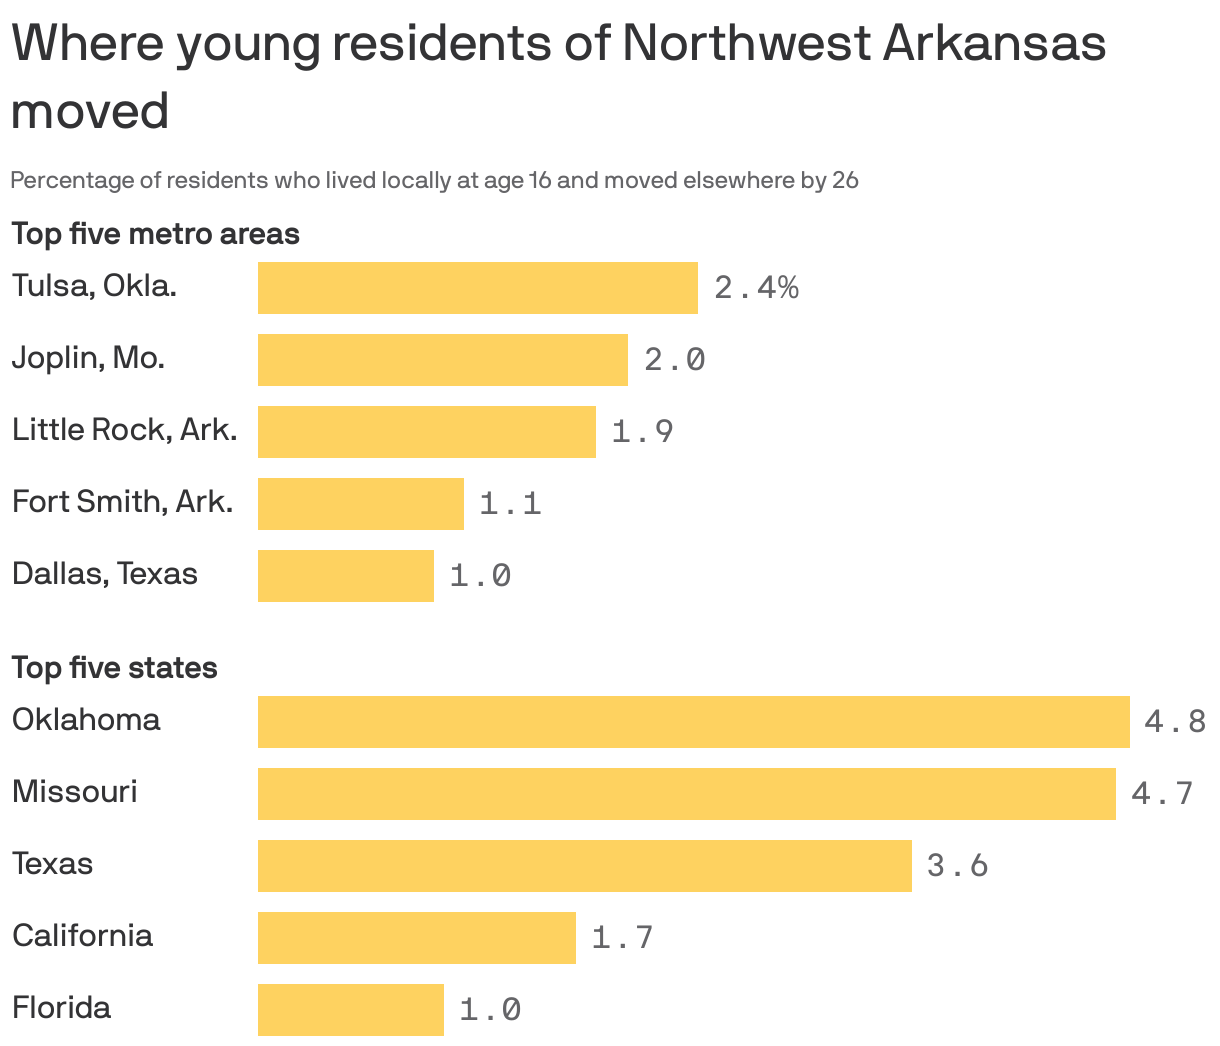 Where young residents of Northwest Arkansas moved